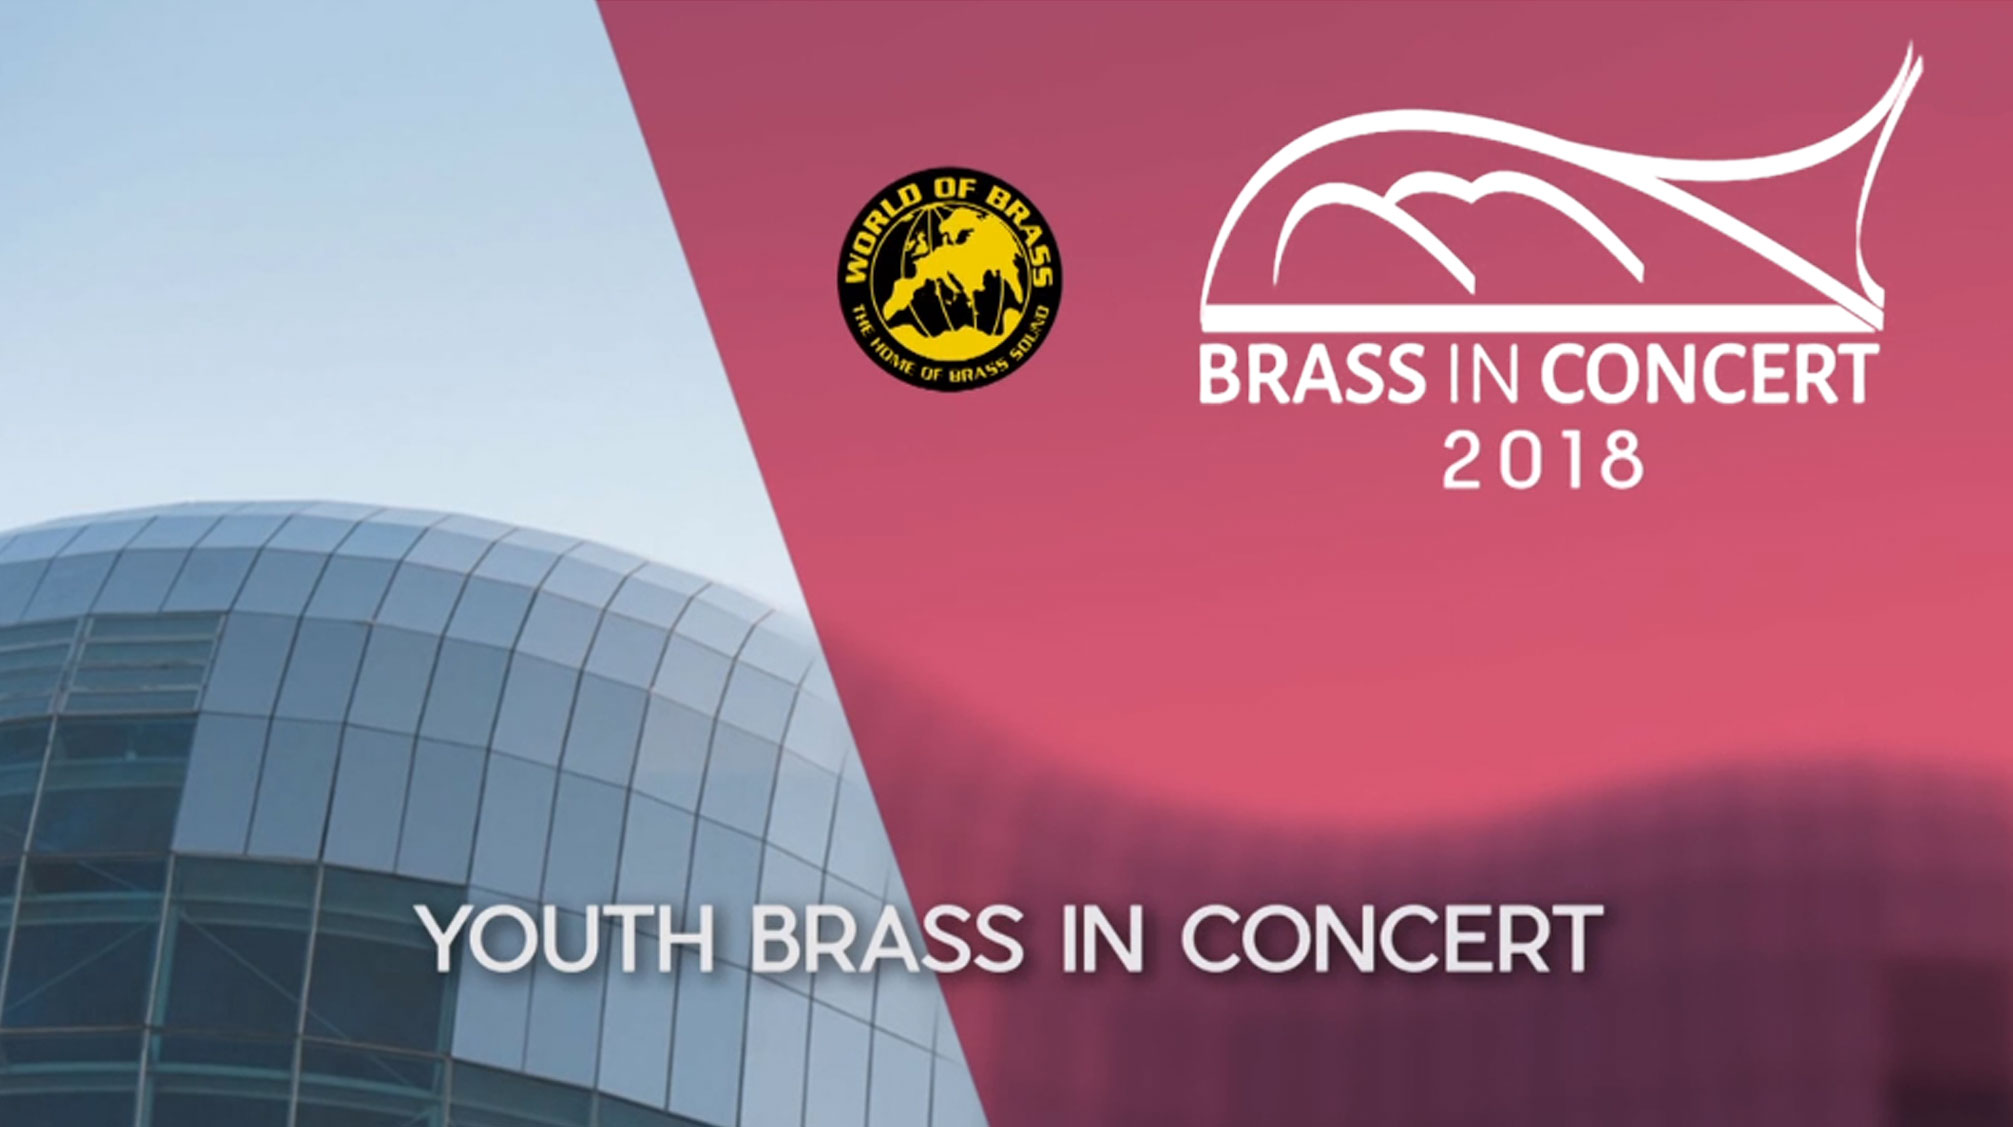 Youth Brass in Concert Championship 2018